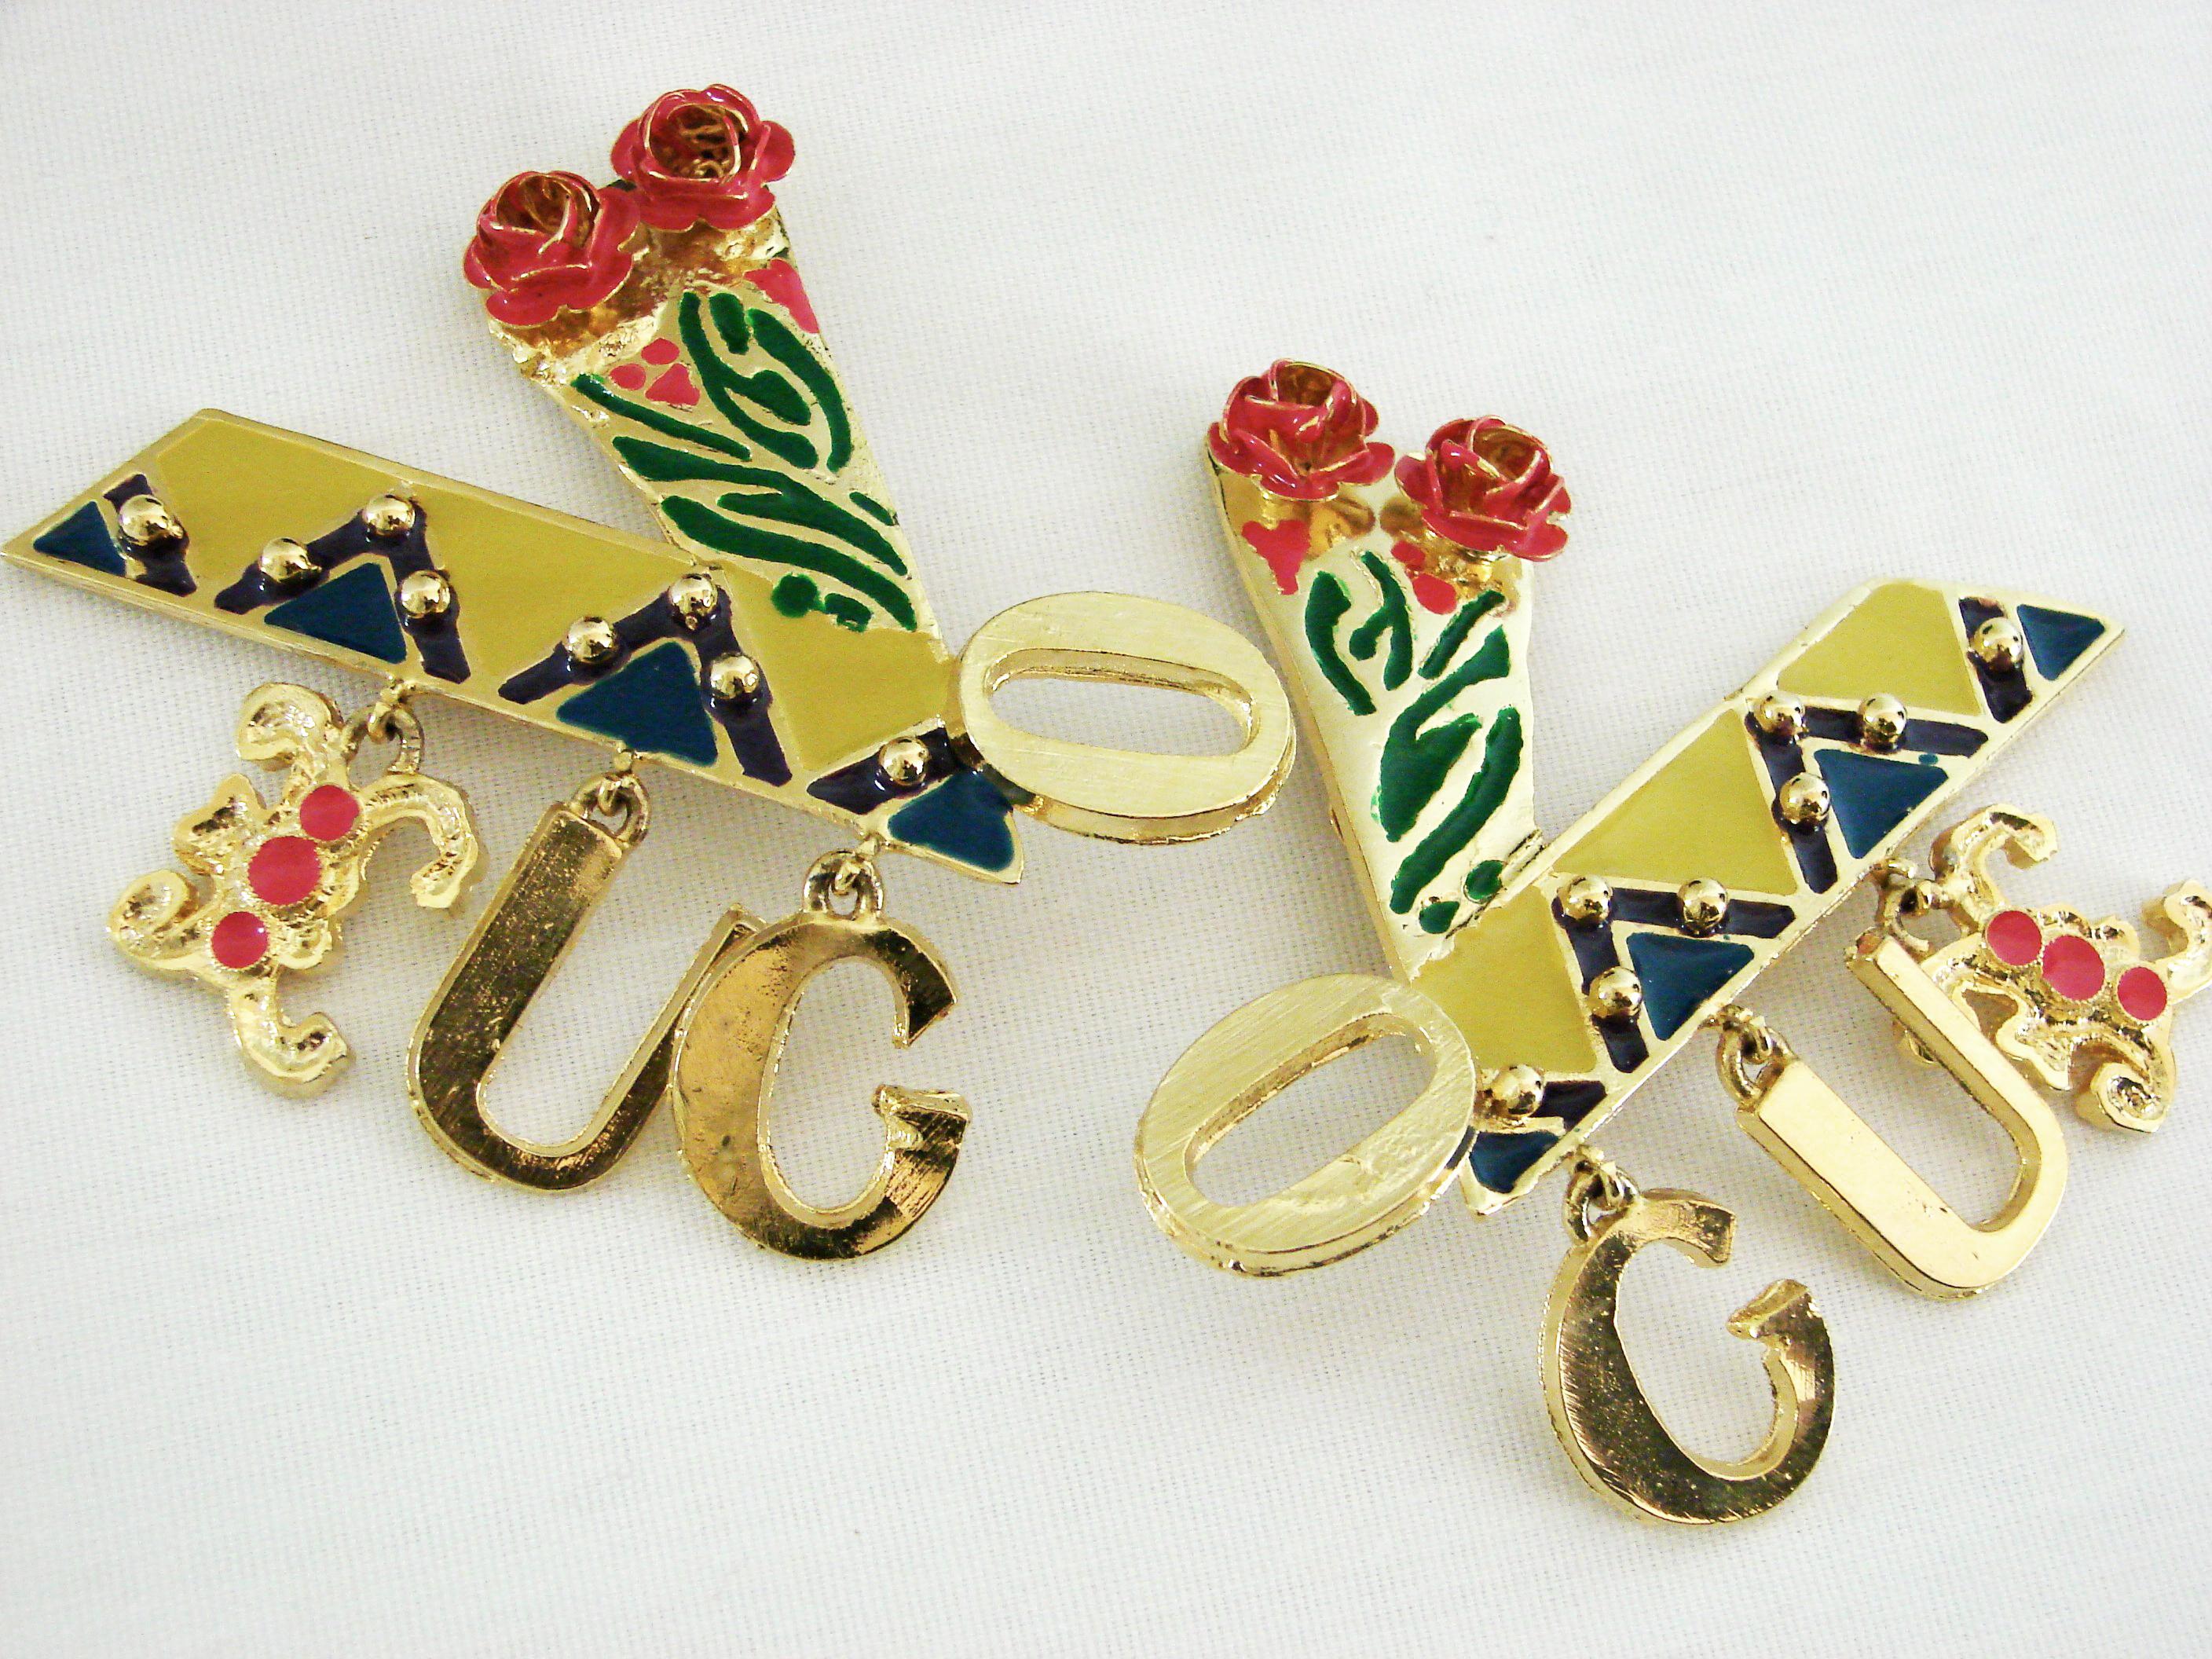 Original Gianni Versace Large Vogue Cover Earrings Enamel with Roses 1990s + Box 4